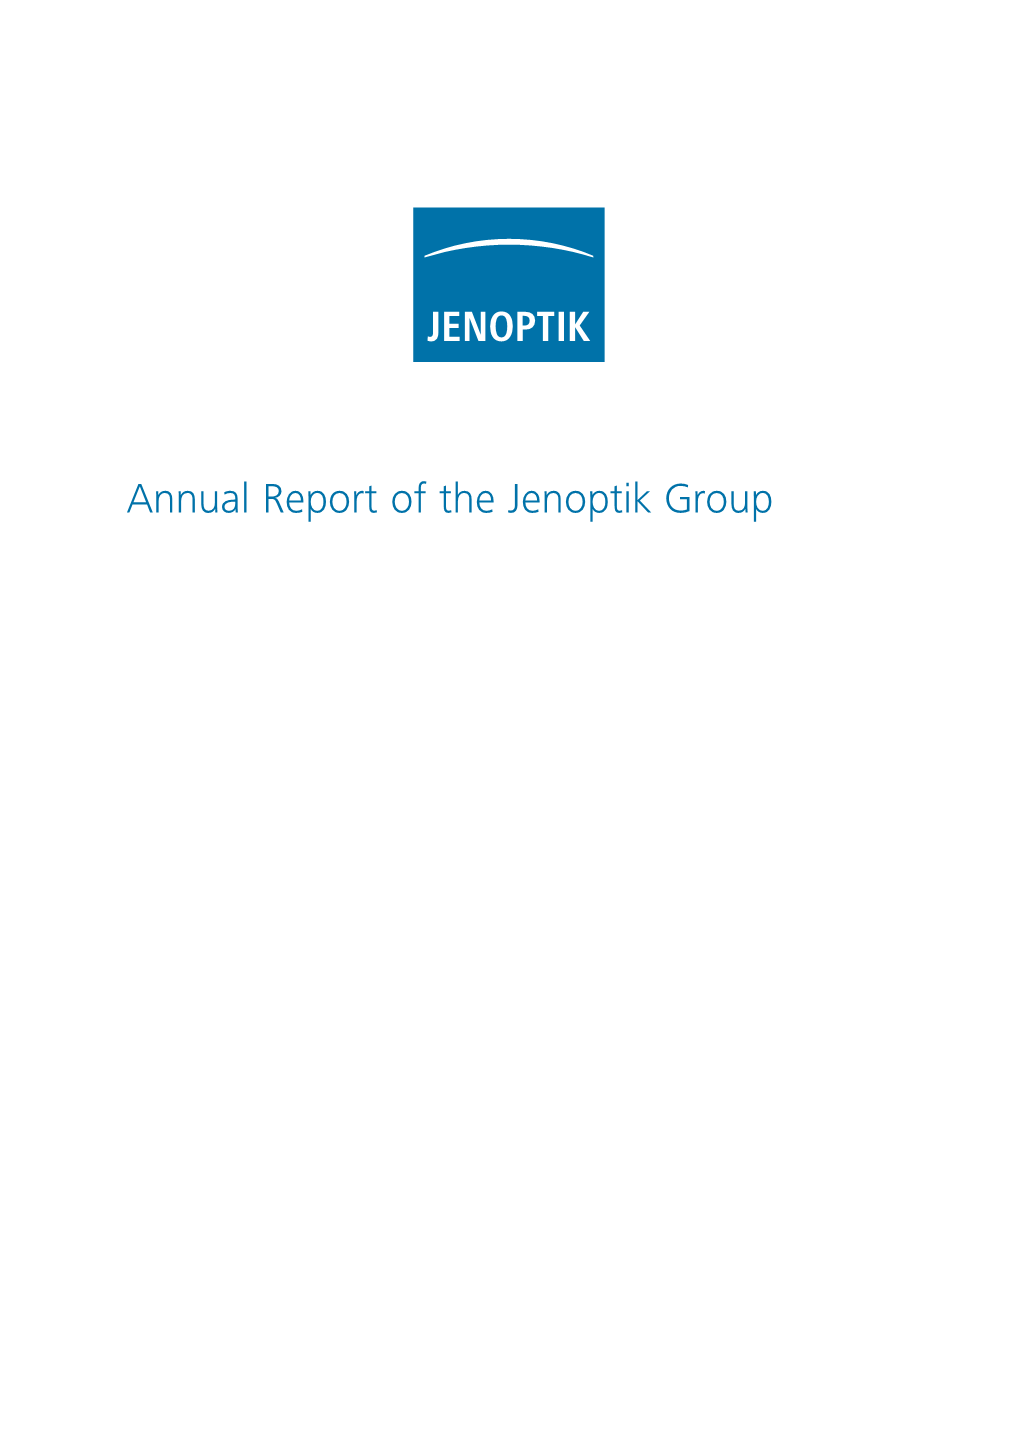 Annual Report of the Jenoptik Group Lasers & Material Processing | Optical Systems | Industrial Metrology | Traffic Solutions | Defense & Civil Systems